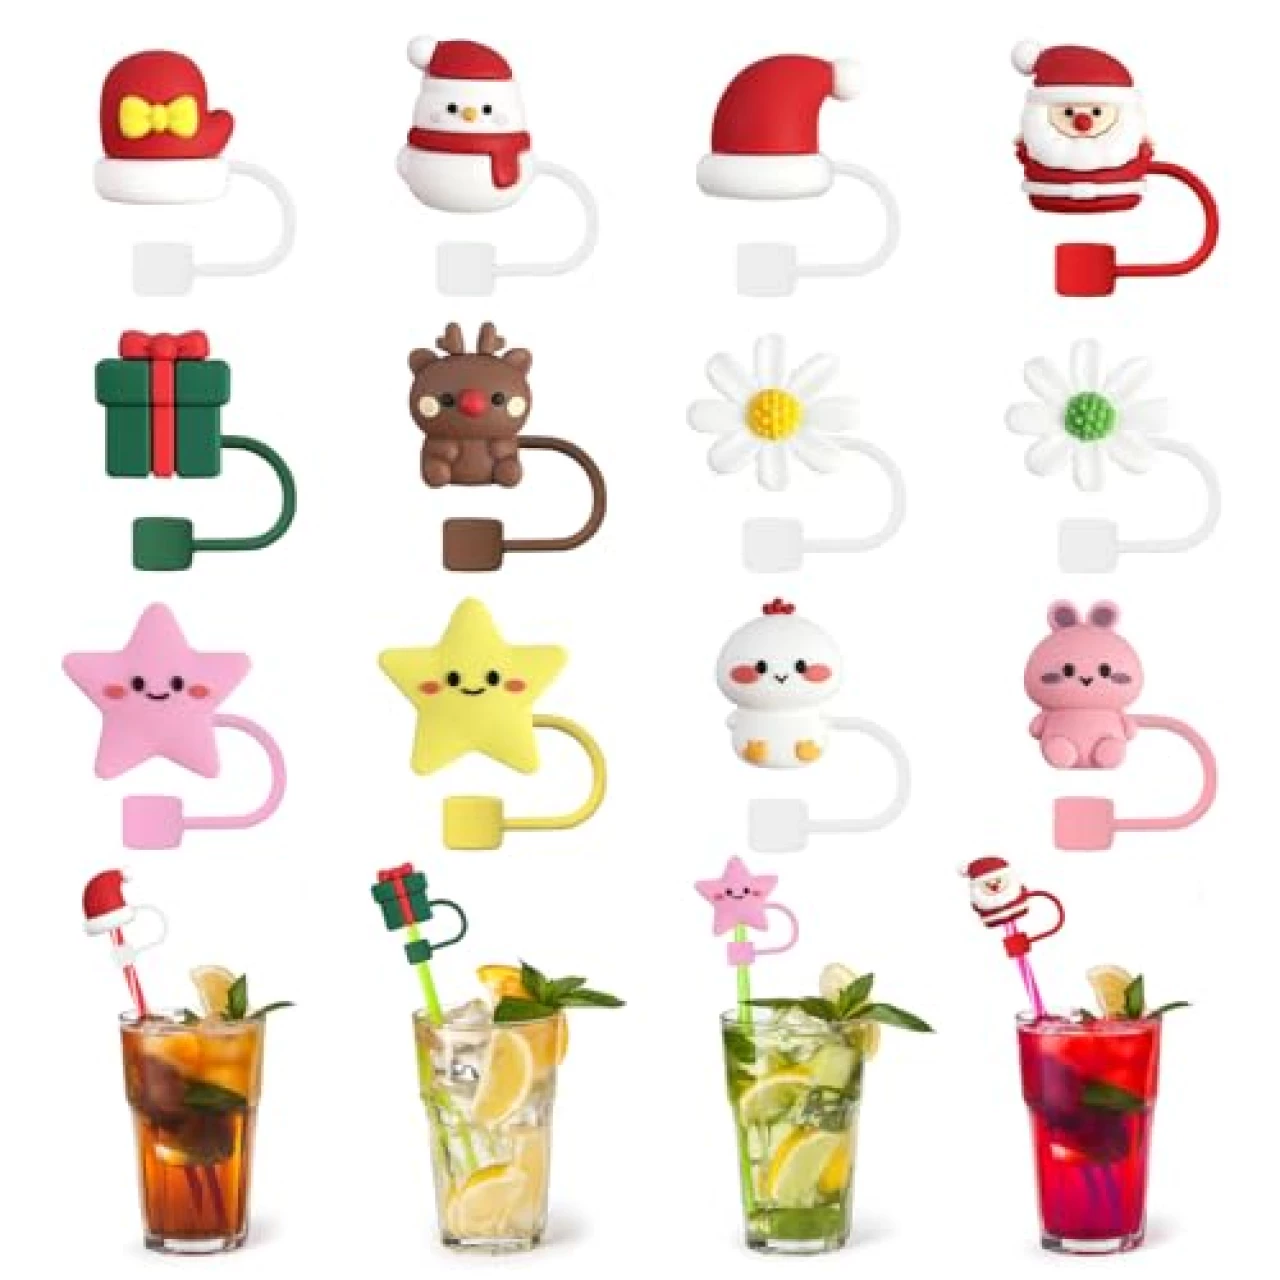 HFYZZ 12Pcs Straw Covers,10mm Christmas Theme Cute Cartoon Silicone Straw Toppers